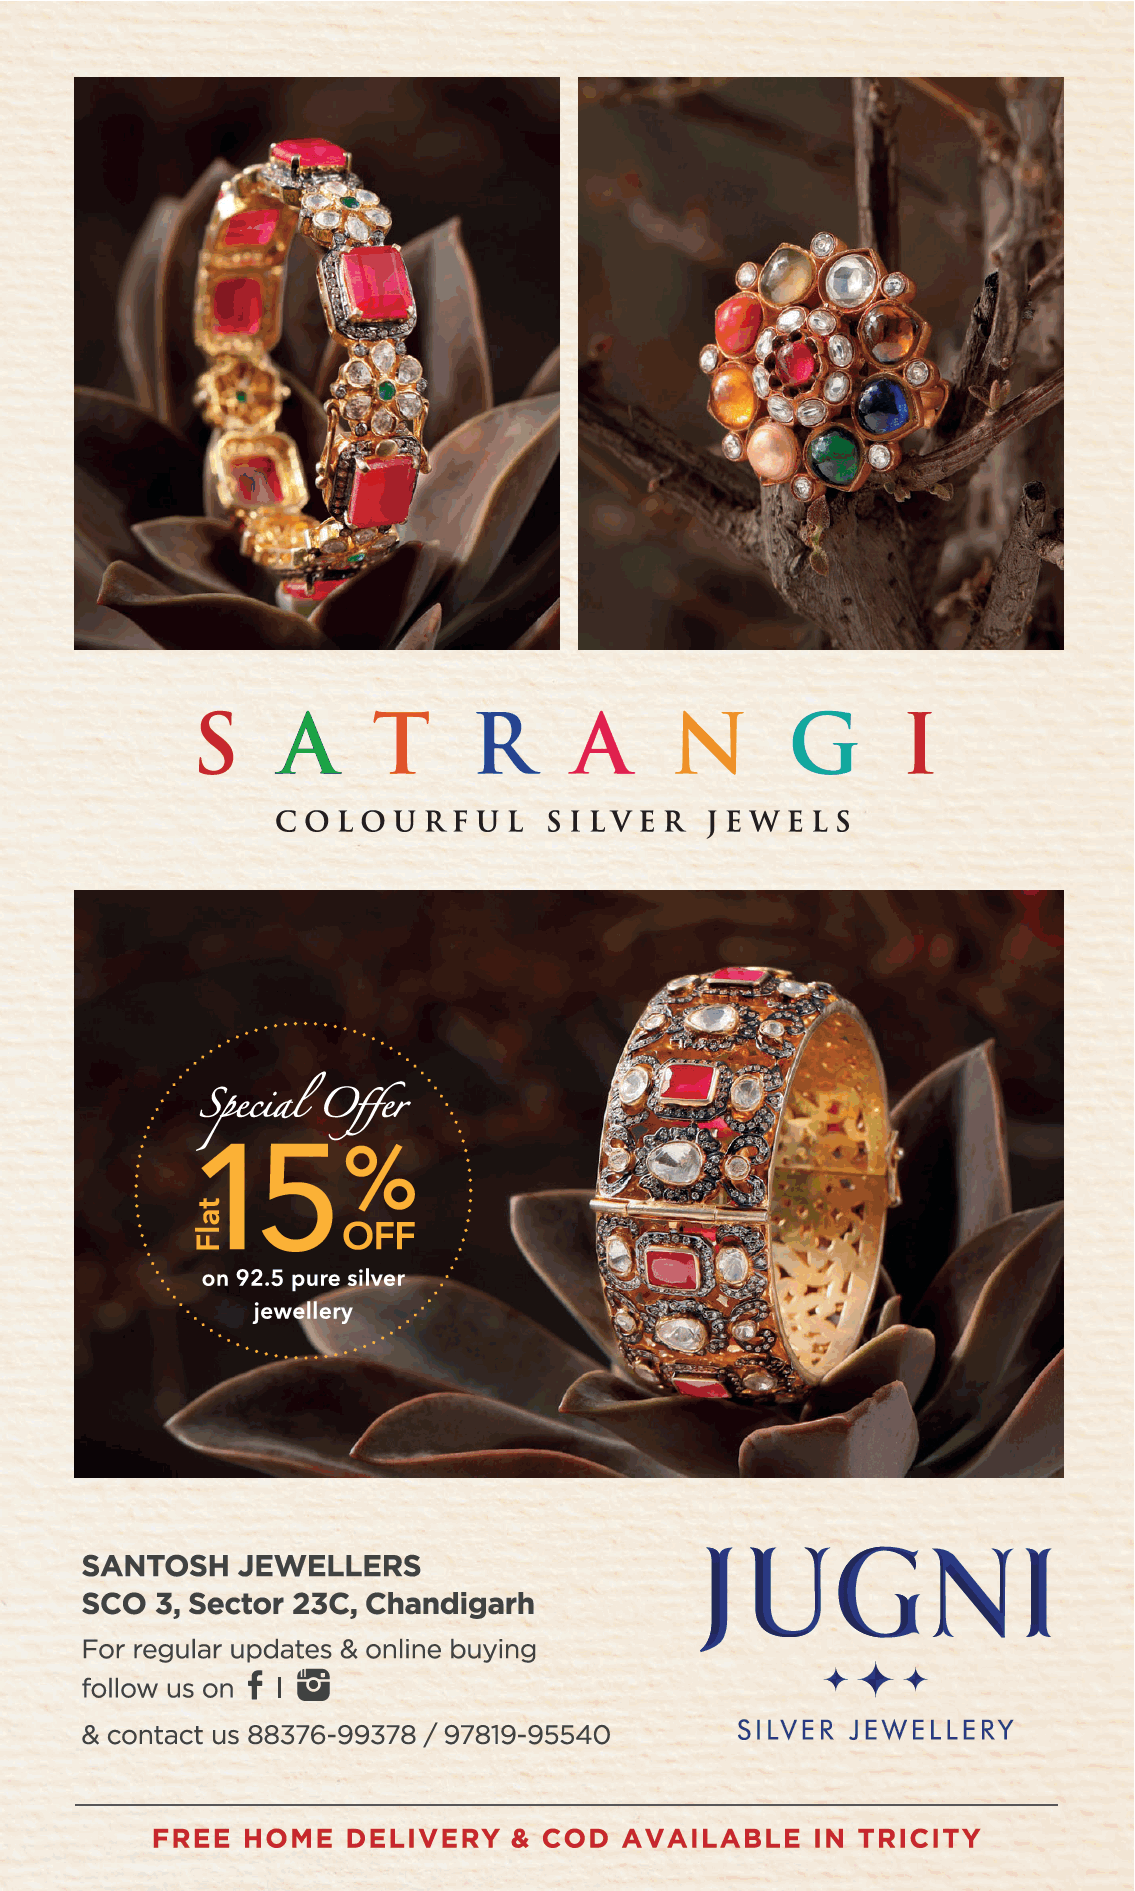 jugni-silver-jewellery-satrangi-special-offer-flat-15%-off-ad-times-of-india-chandigarh-10-7-2021